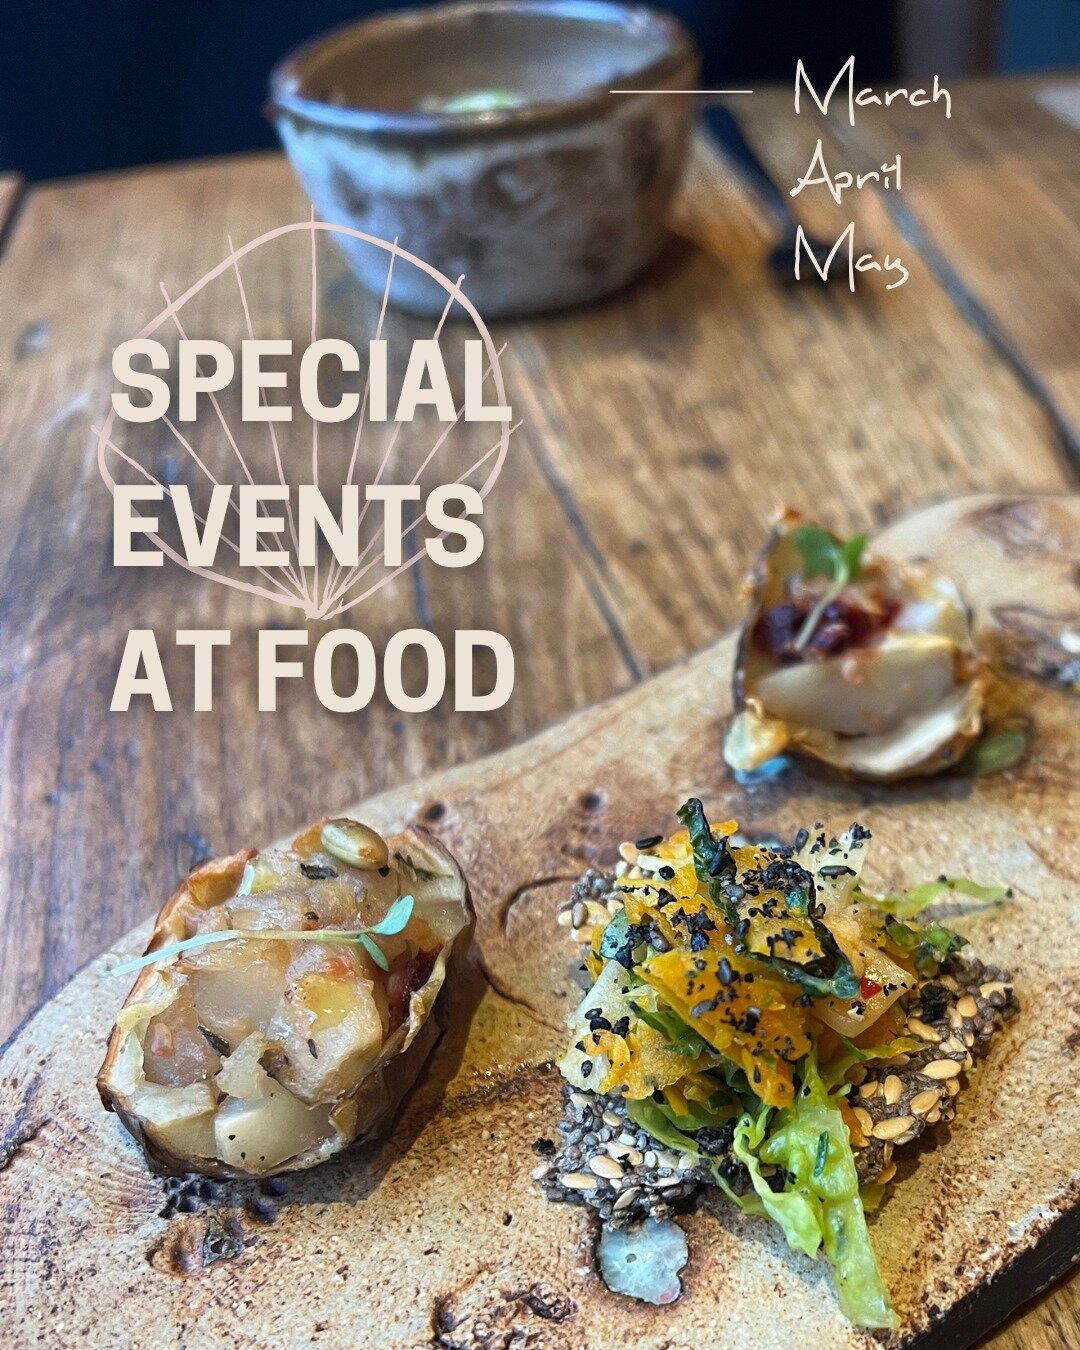 Unforgettable Events @ Food 🗓️

Mark your diaries and reserve your tables as we have a cavalcade of culinary experiences coming up. Here are our March, April and some of May offerings. Spaces can book up fast so be sure to book in advance! 

Any que